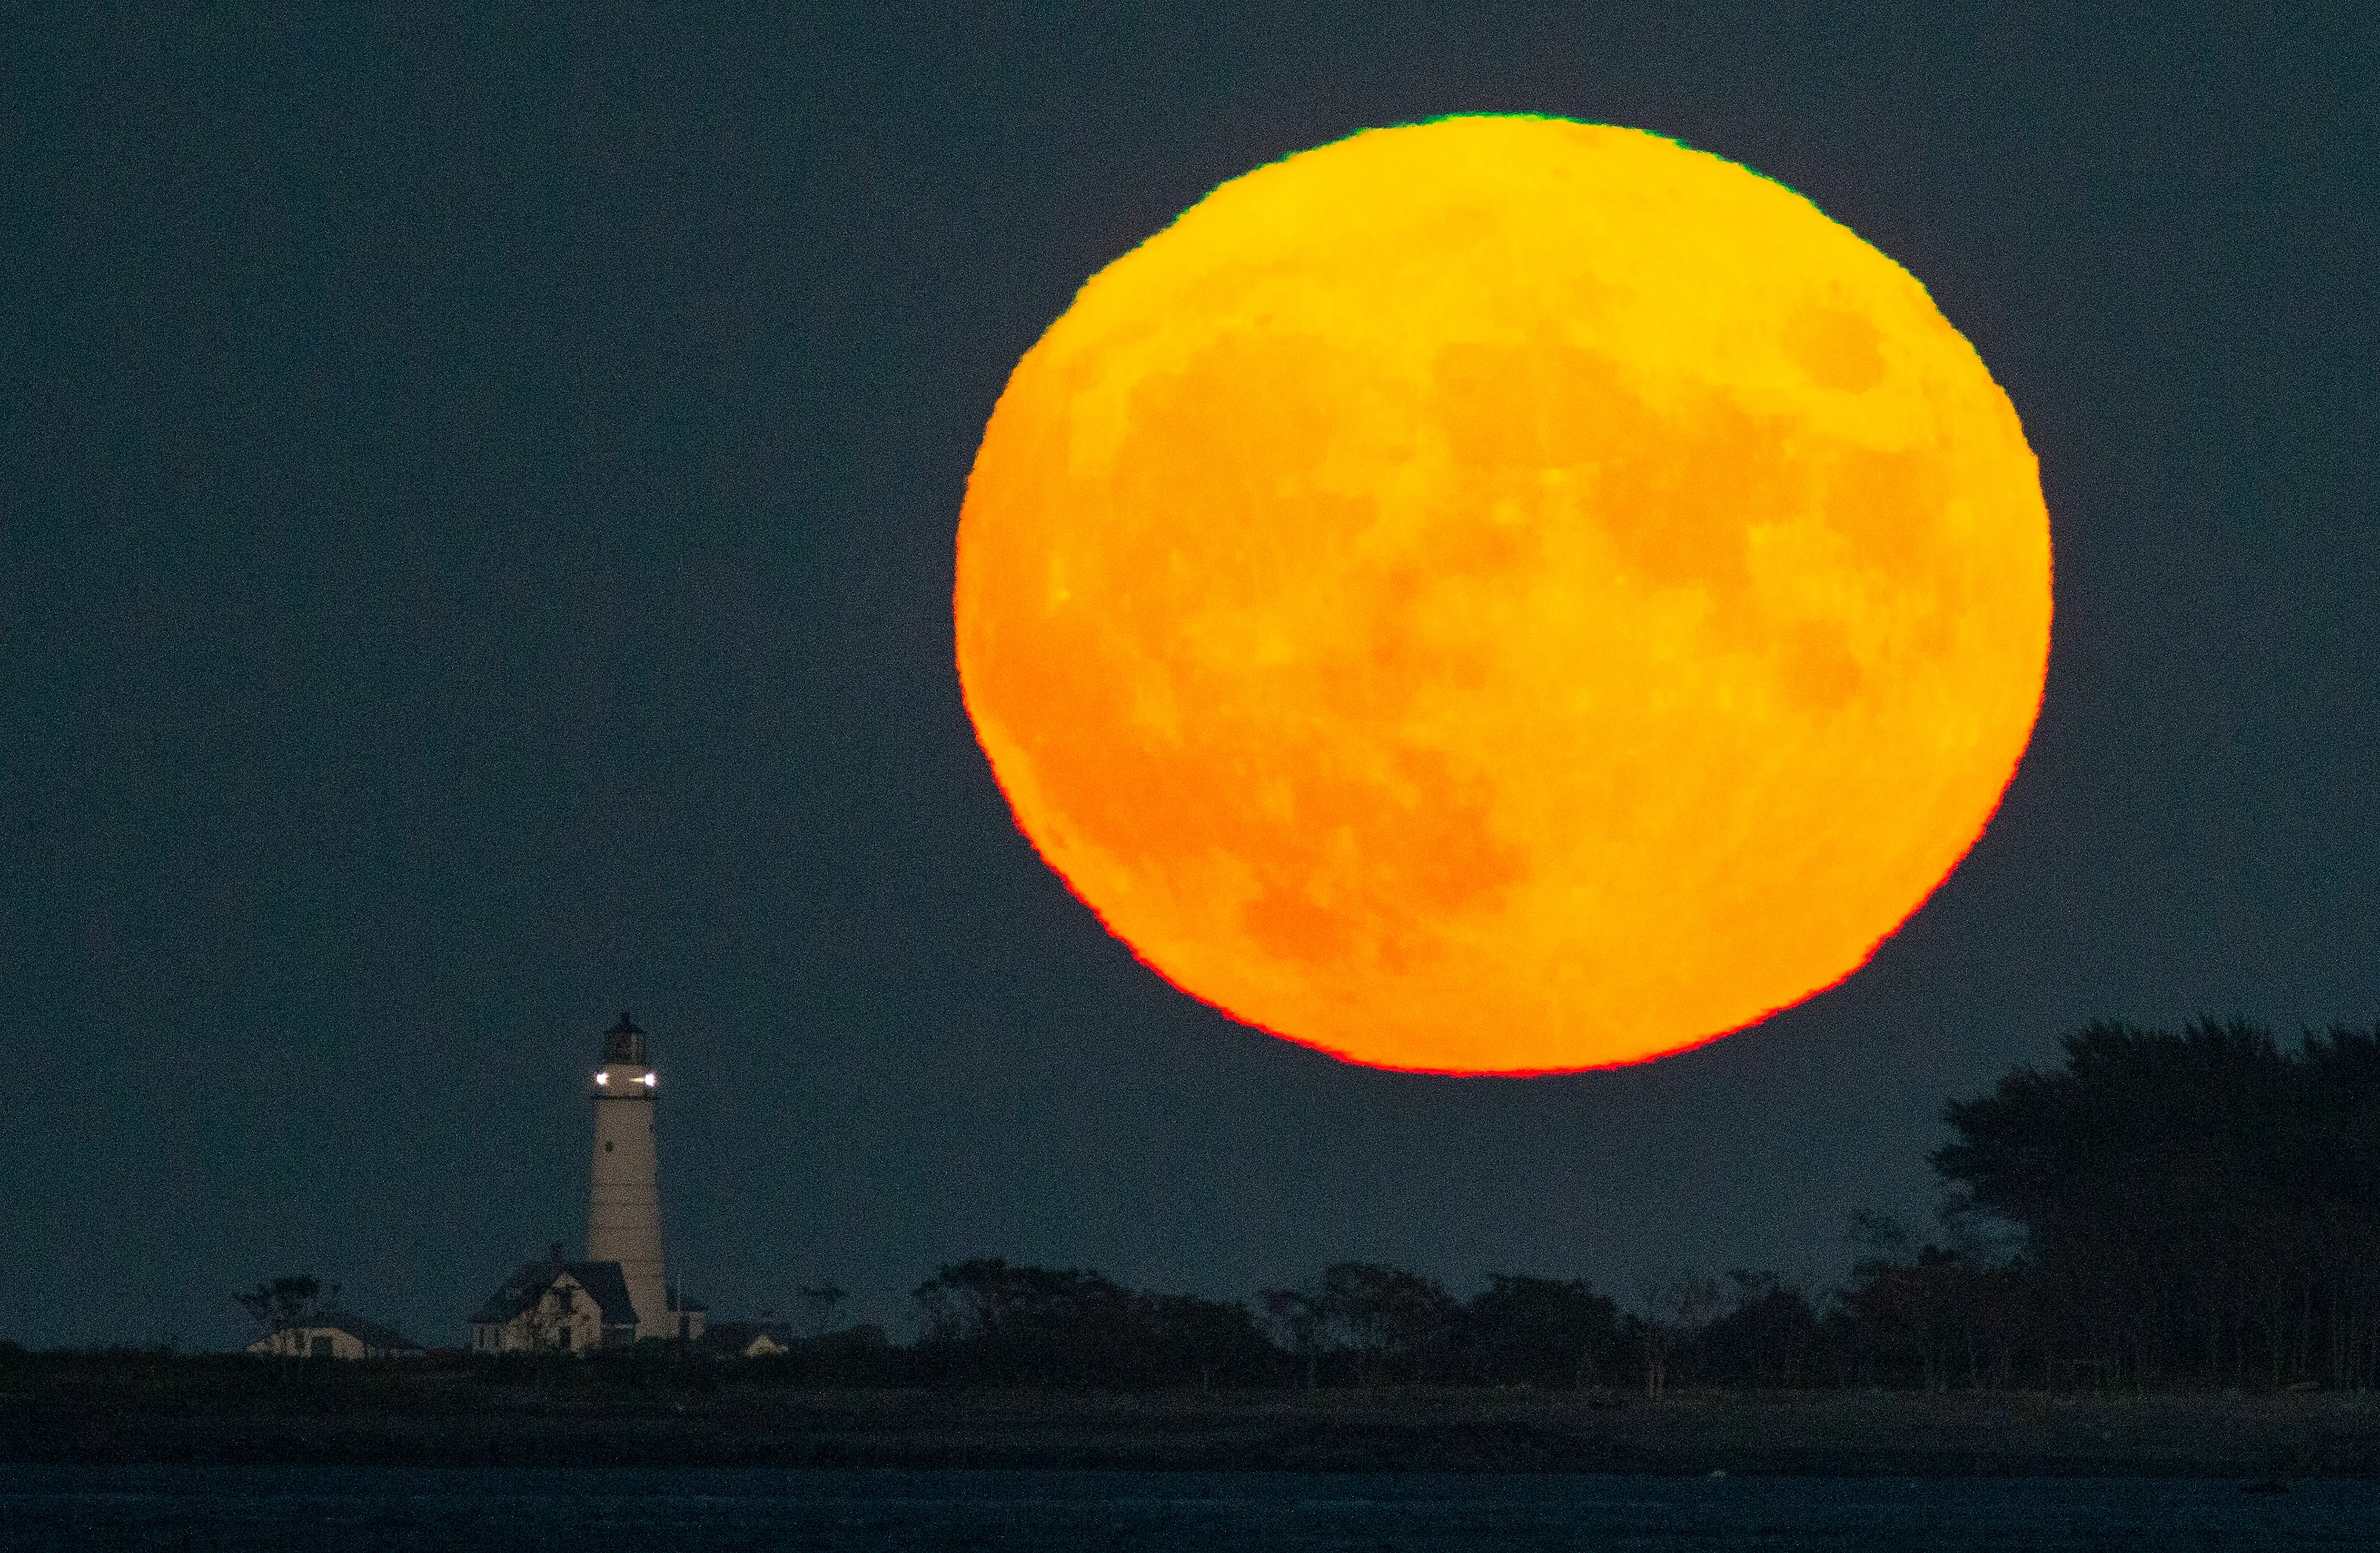 What Is A Harvest Full Moon?